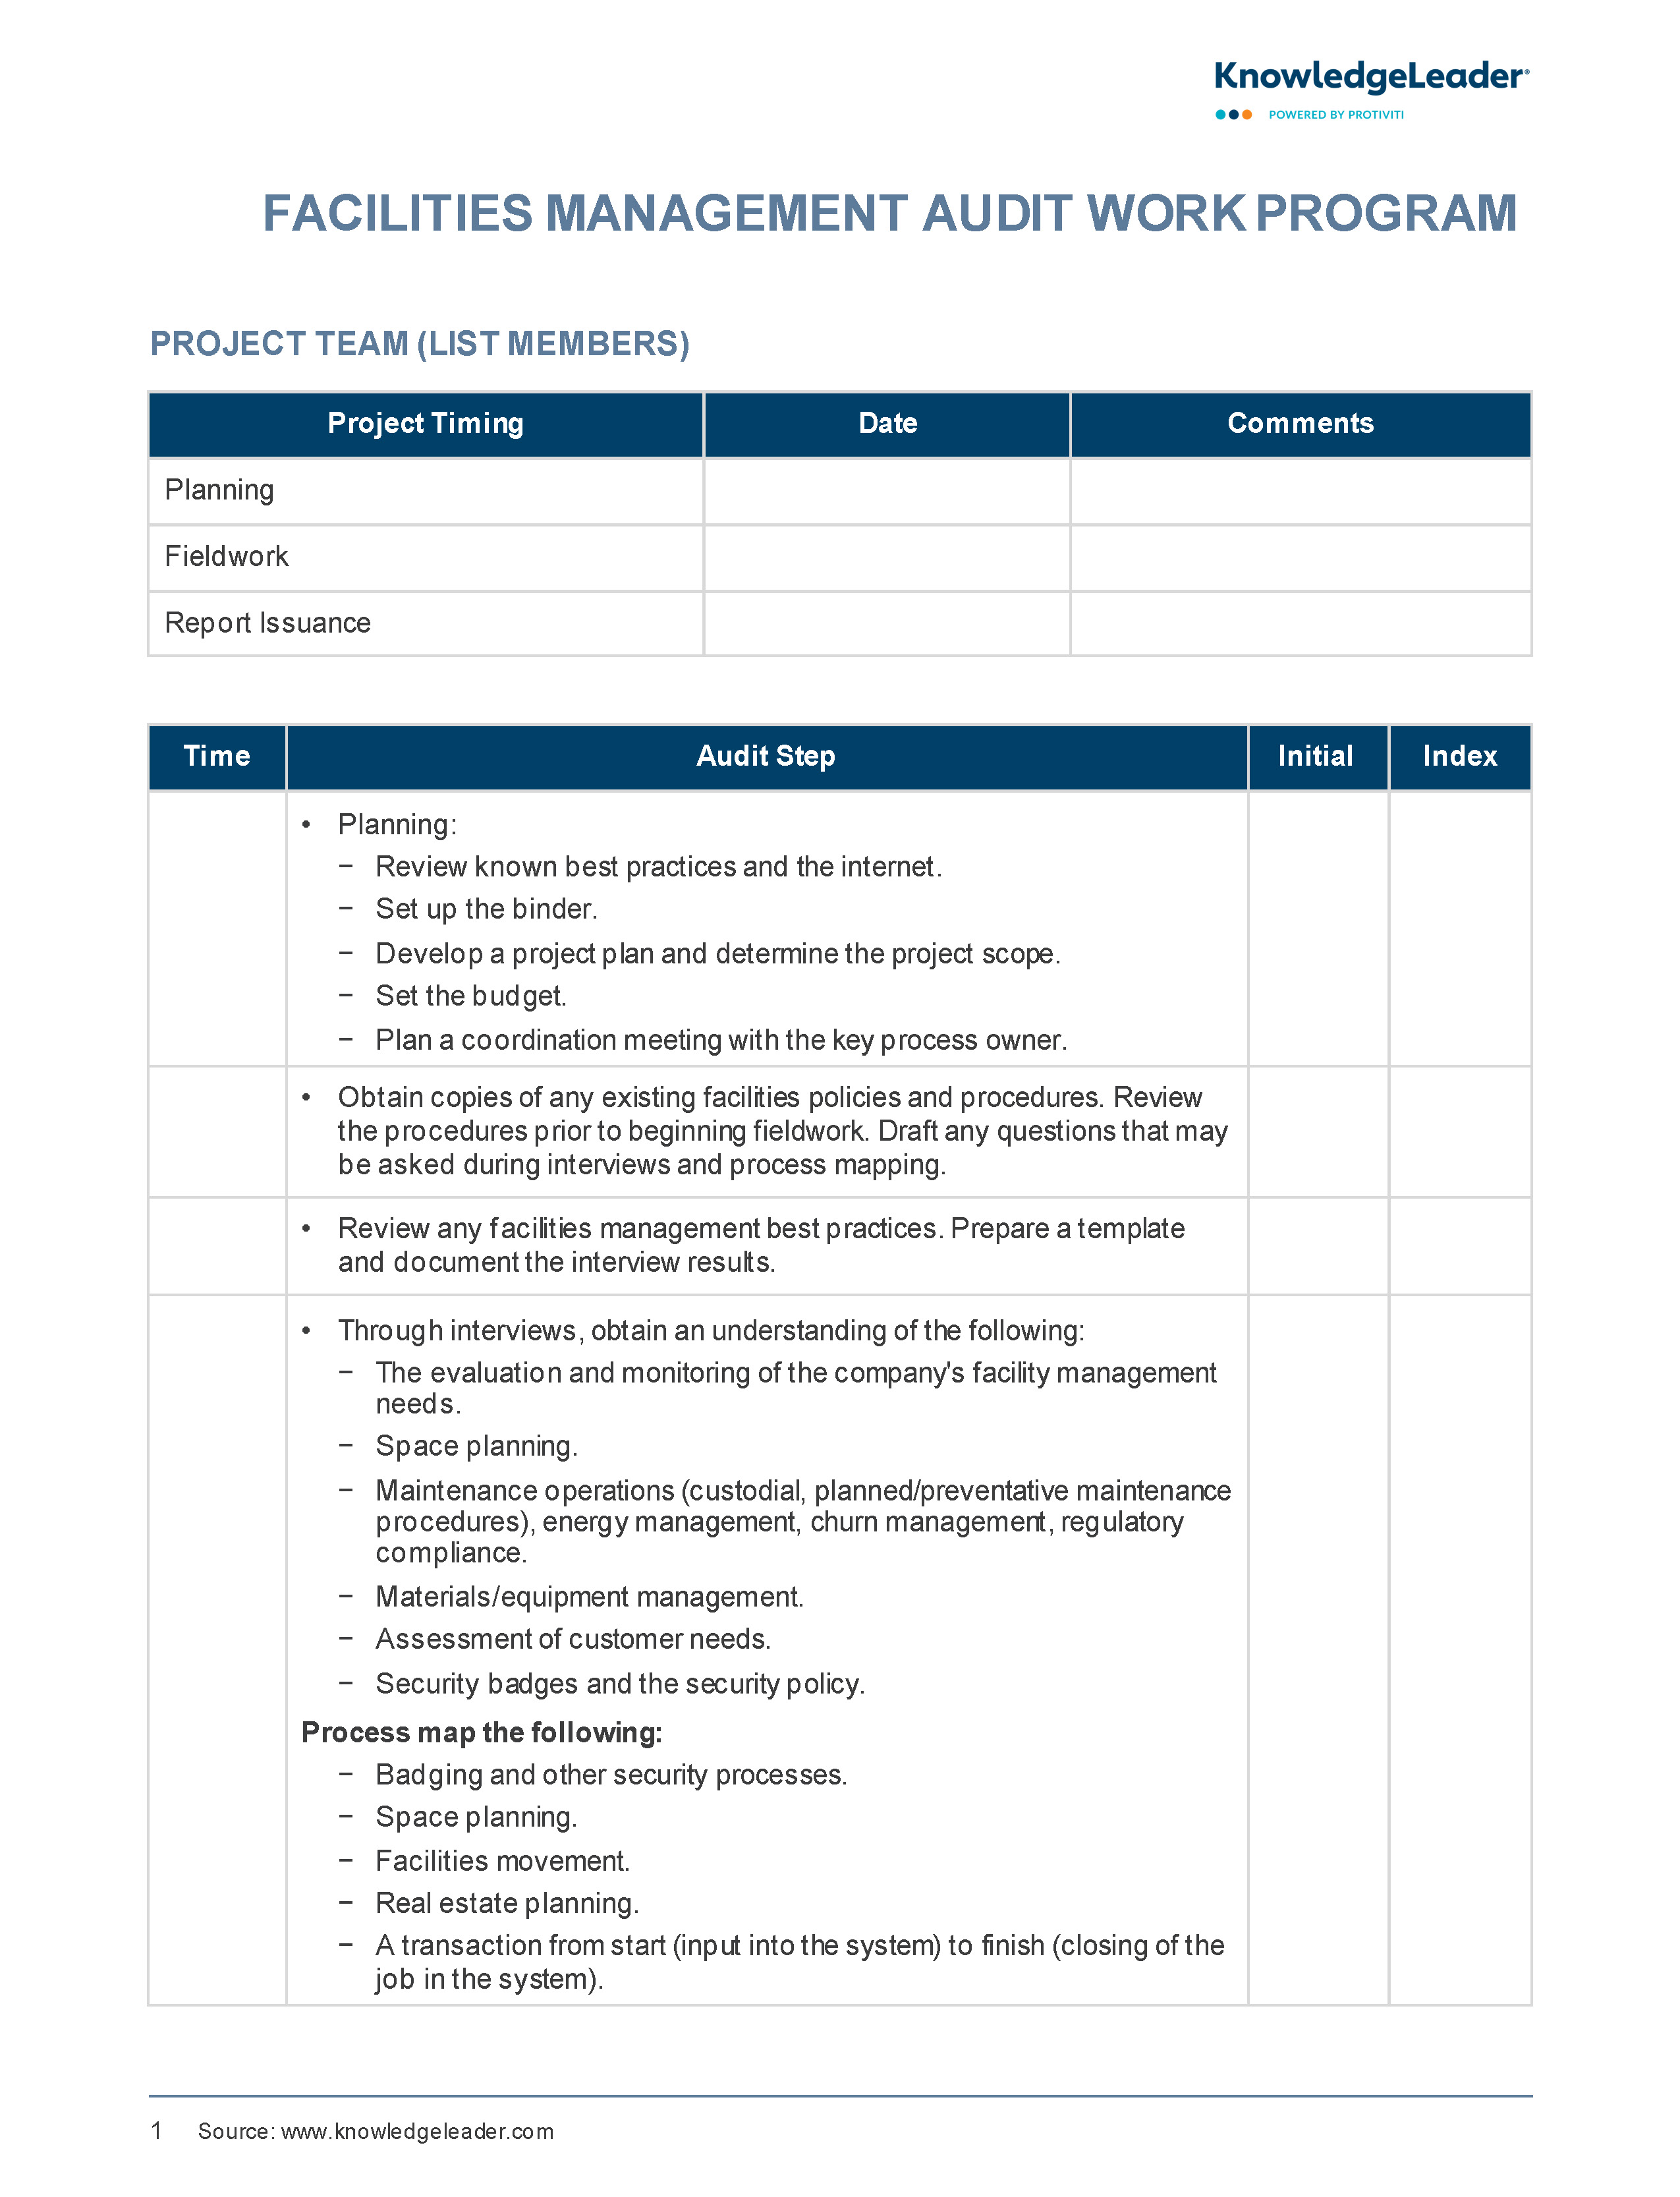 Screenshot of the first page of Facilities Management Audit Work Program